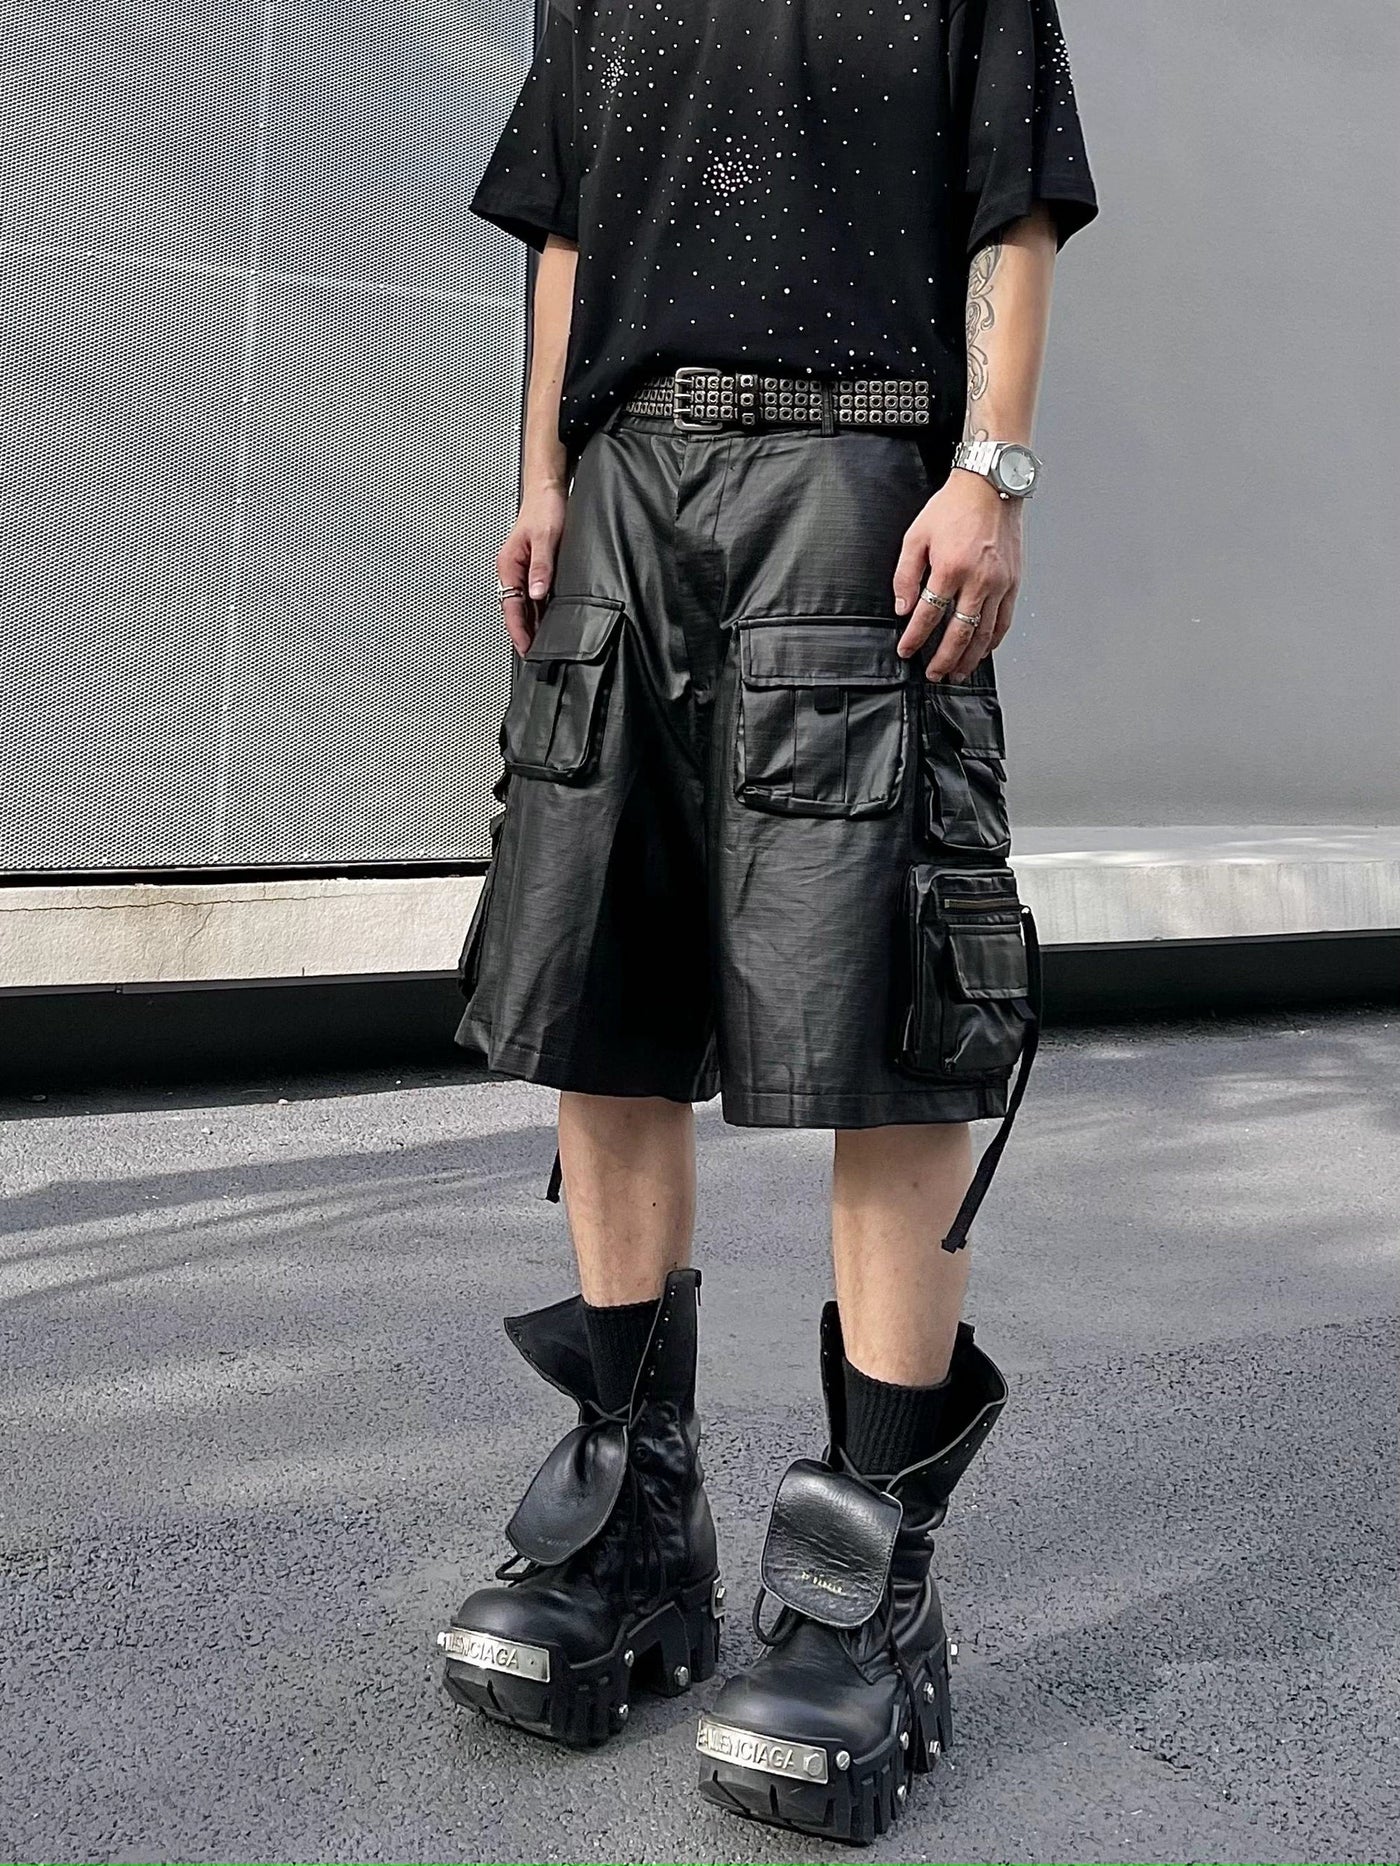 Waxed Leather Cargo Shorts Korean Street Fashion Shorts By Blacklists Shop Online at OH Vault